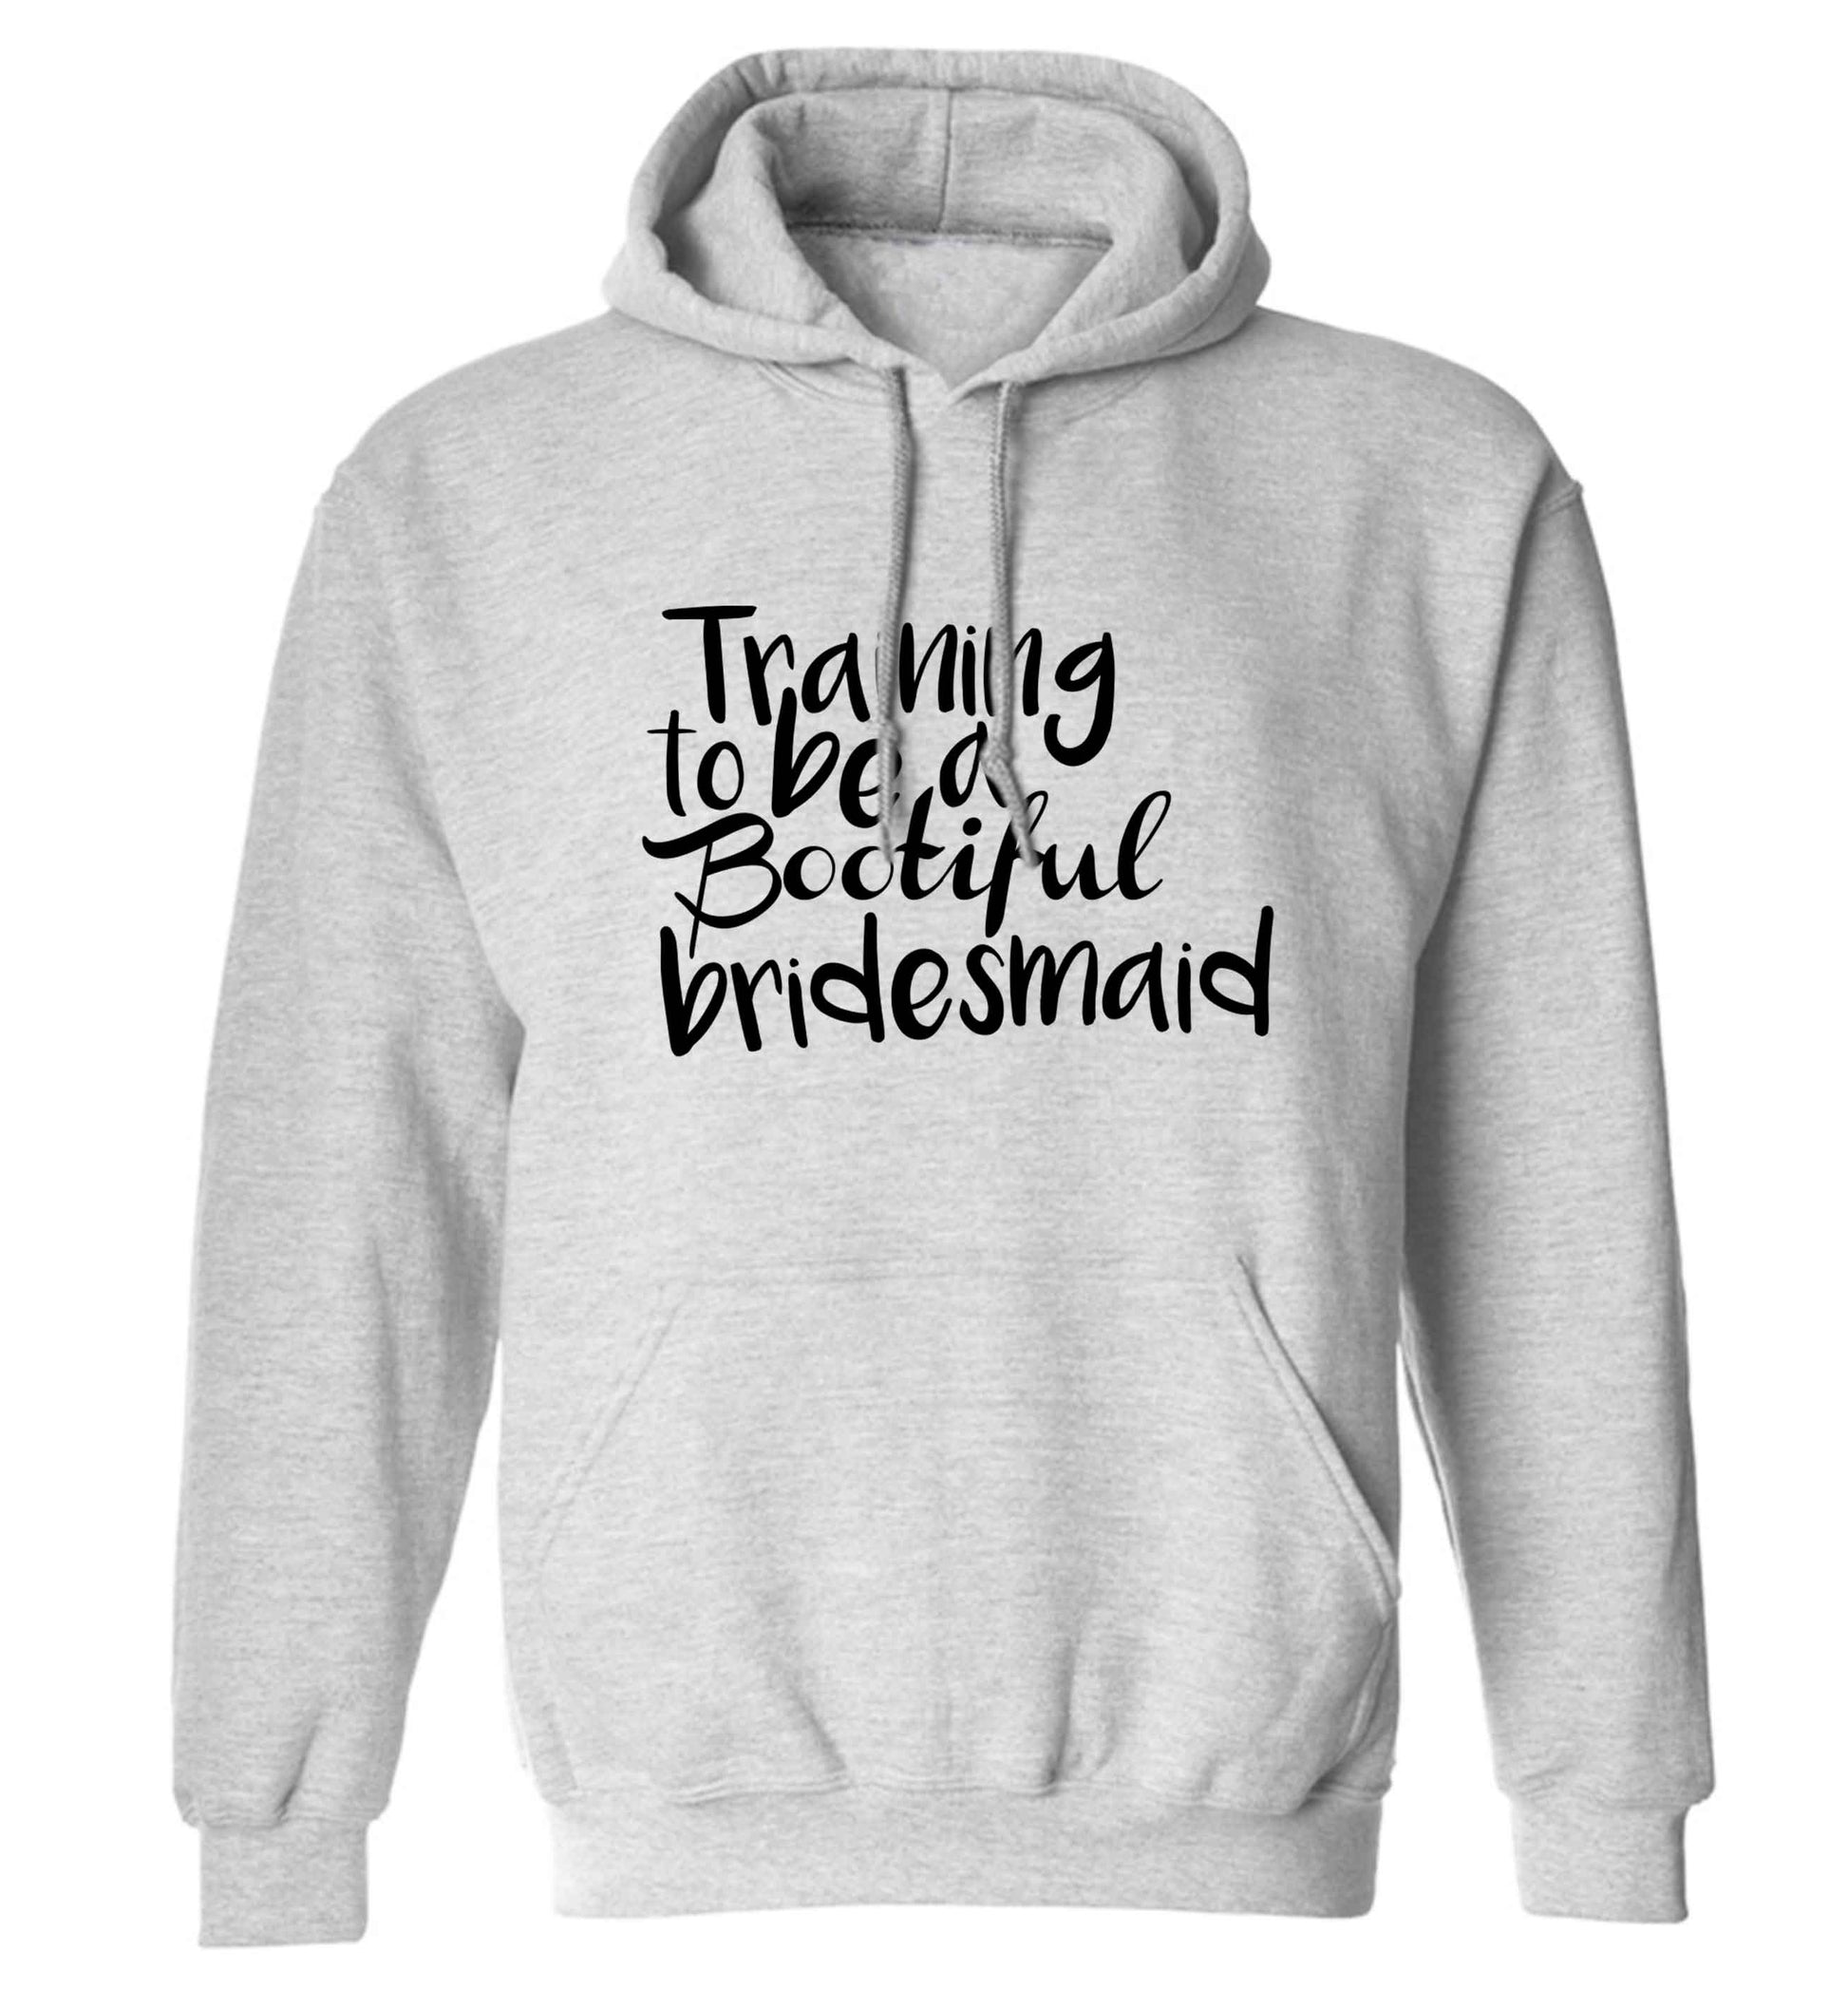 Get motivated and get fit for your big day! Our workout quotes and designs will get you ready to sweat! Perfect for any bride, groom or bridesmaid to be!  adults unisex grey hoodie 2XL